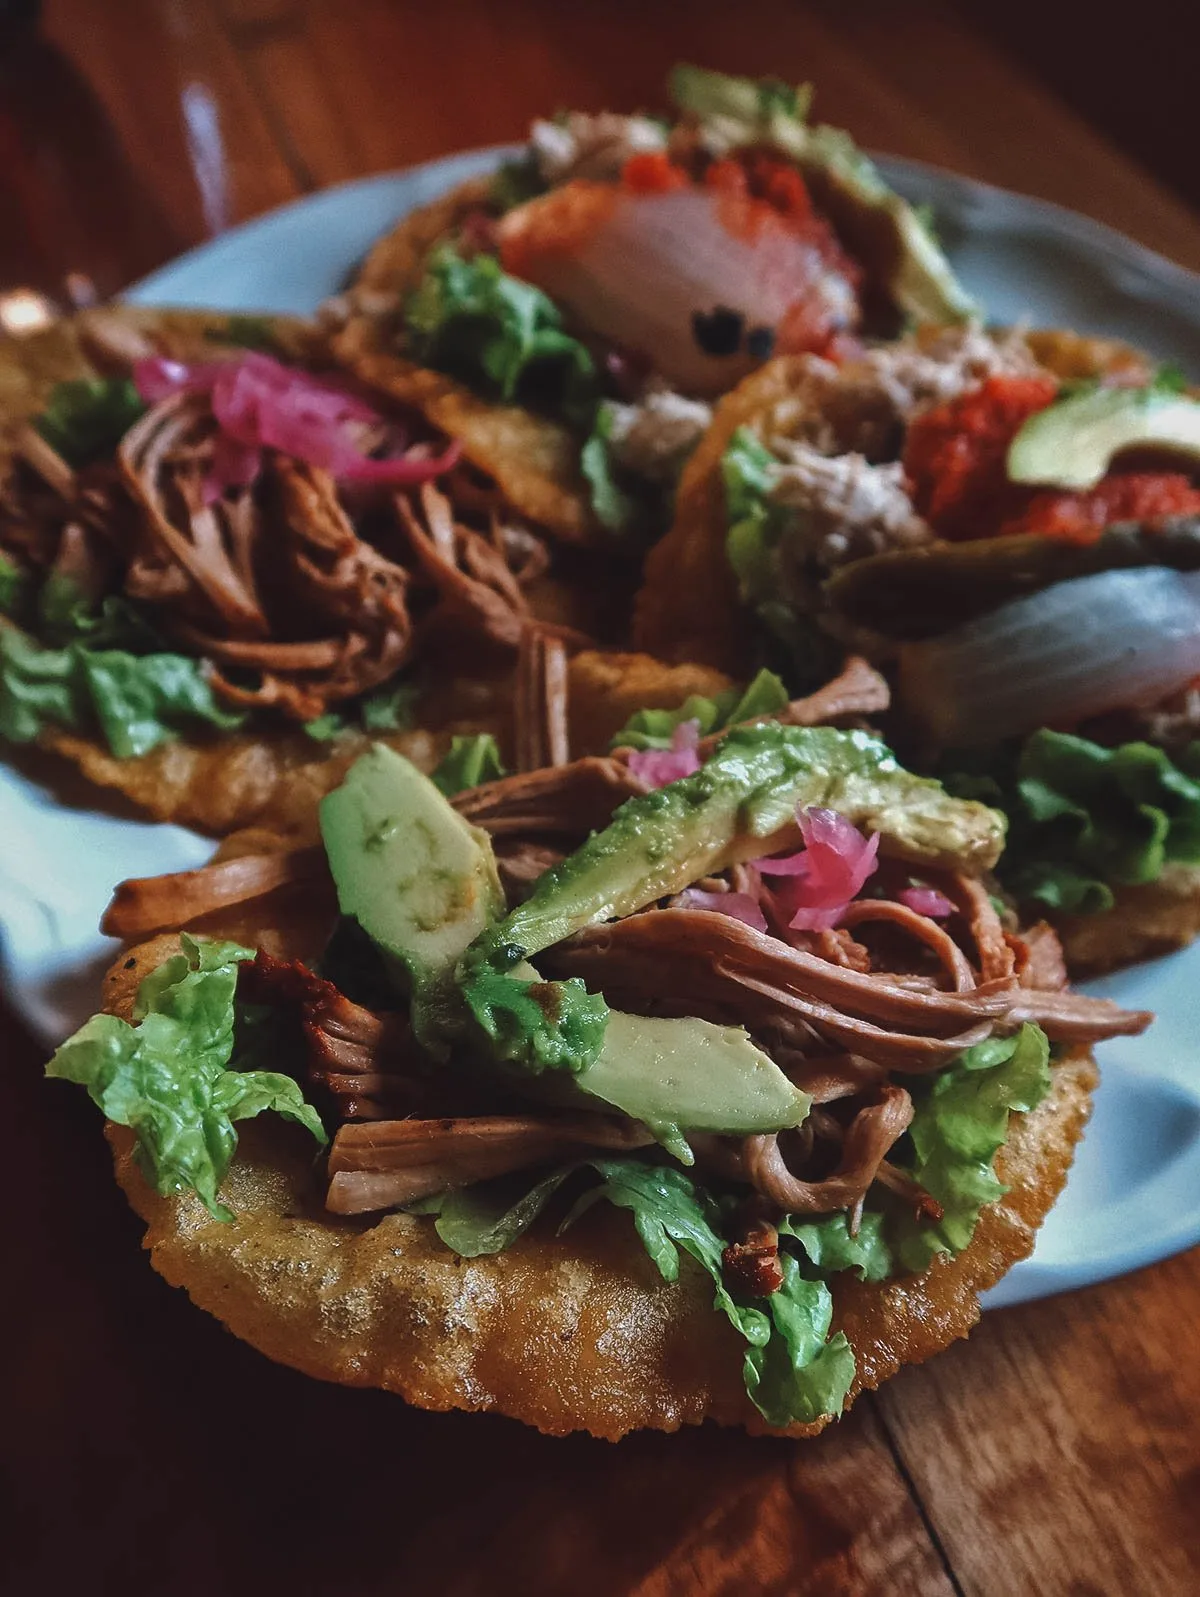 Salbutes from a restaurant in Valladolid